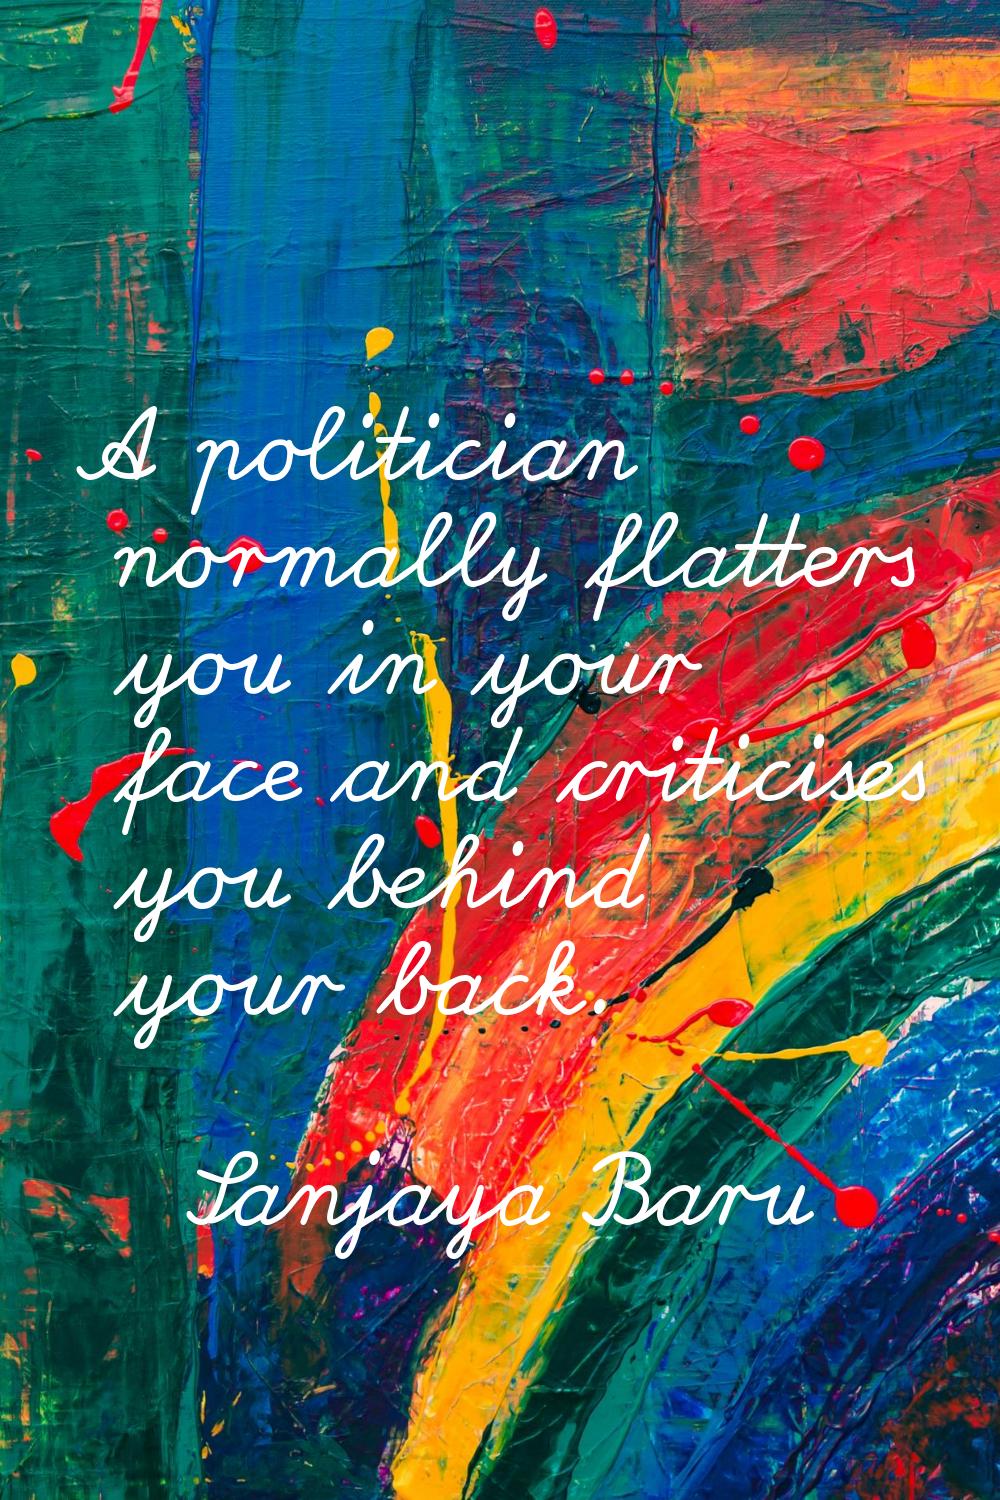 A politician normally flatters you in your face and criticises you behind your back.